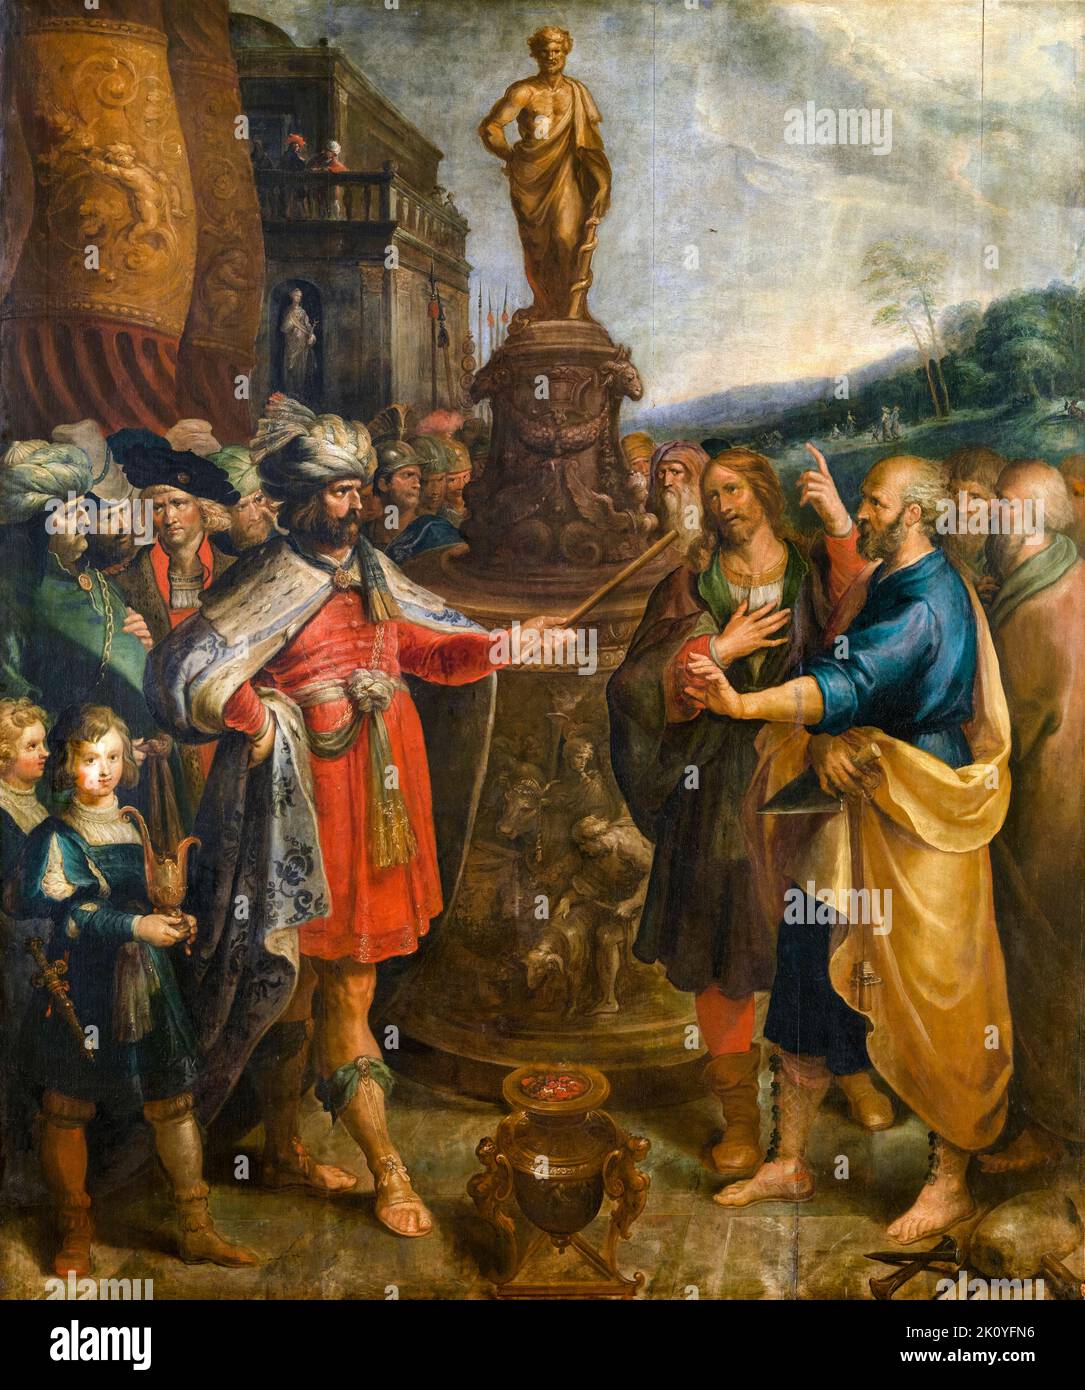 The Emperor Diocletian (circa 242/245-311/312), shows the Statue of Asclepius, painting in oil by Frans Francken the Younger, 1624 Stock Photo